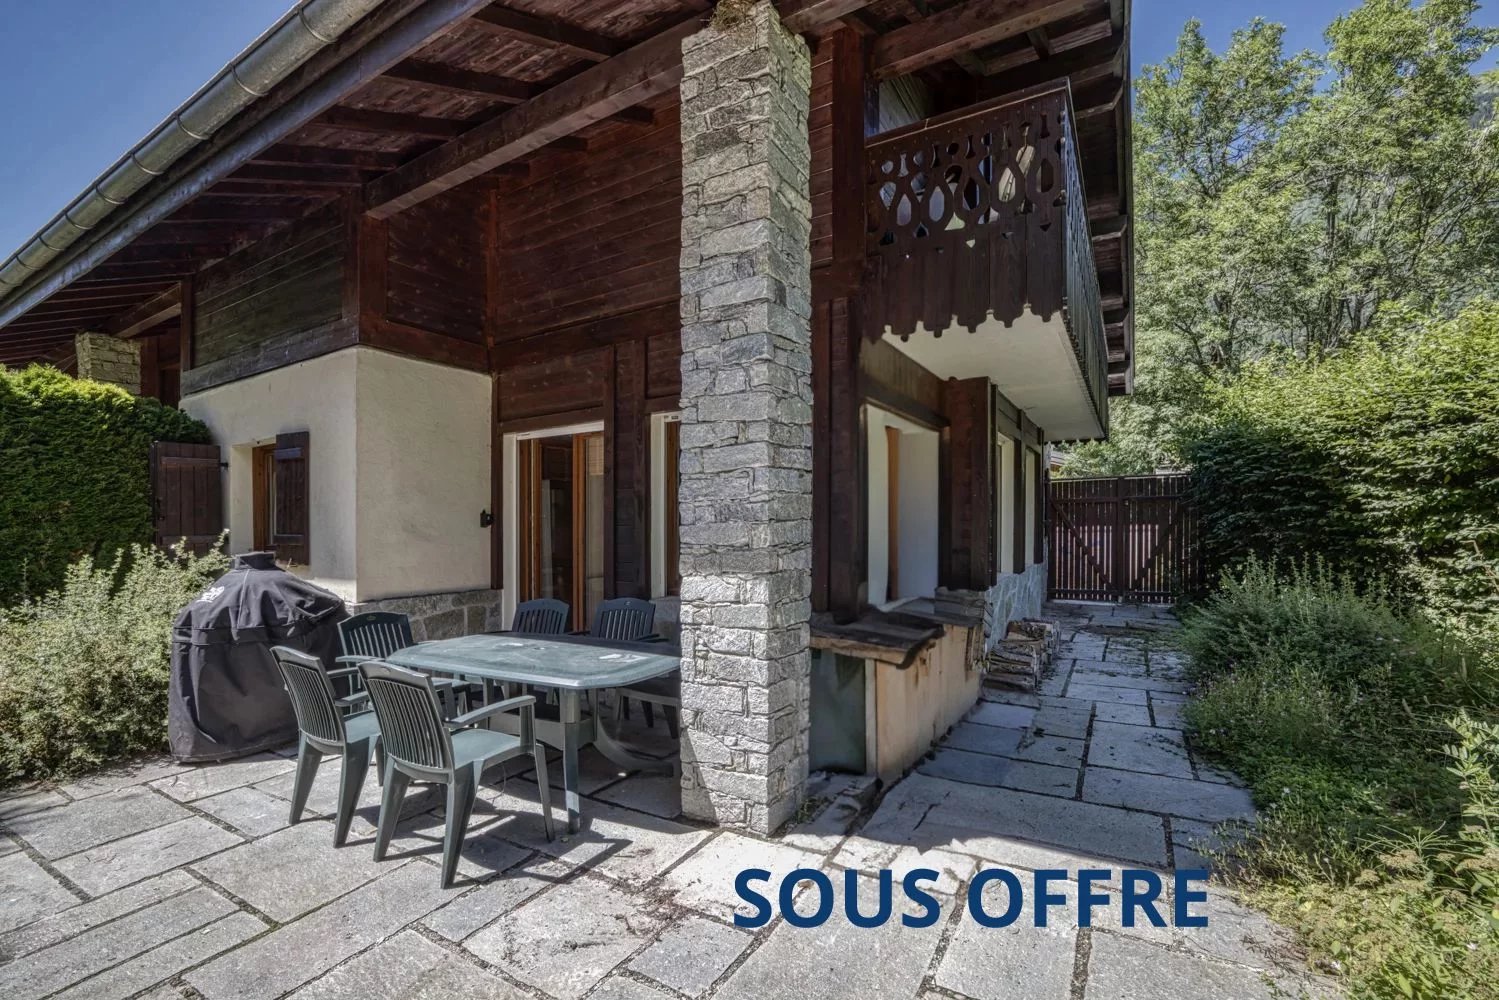 Beautyfull chalet in the quiet Les Granges sector of Les Houches